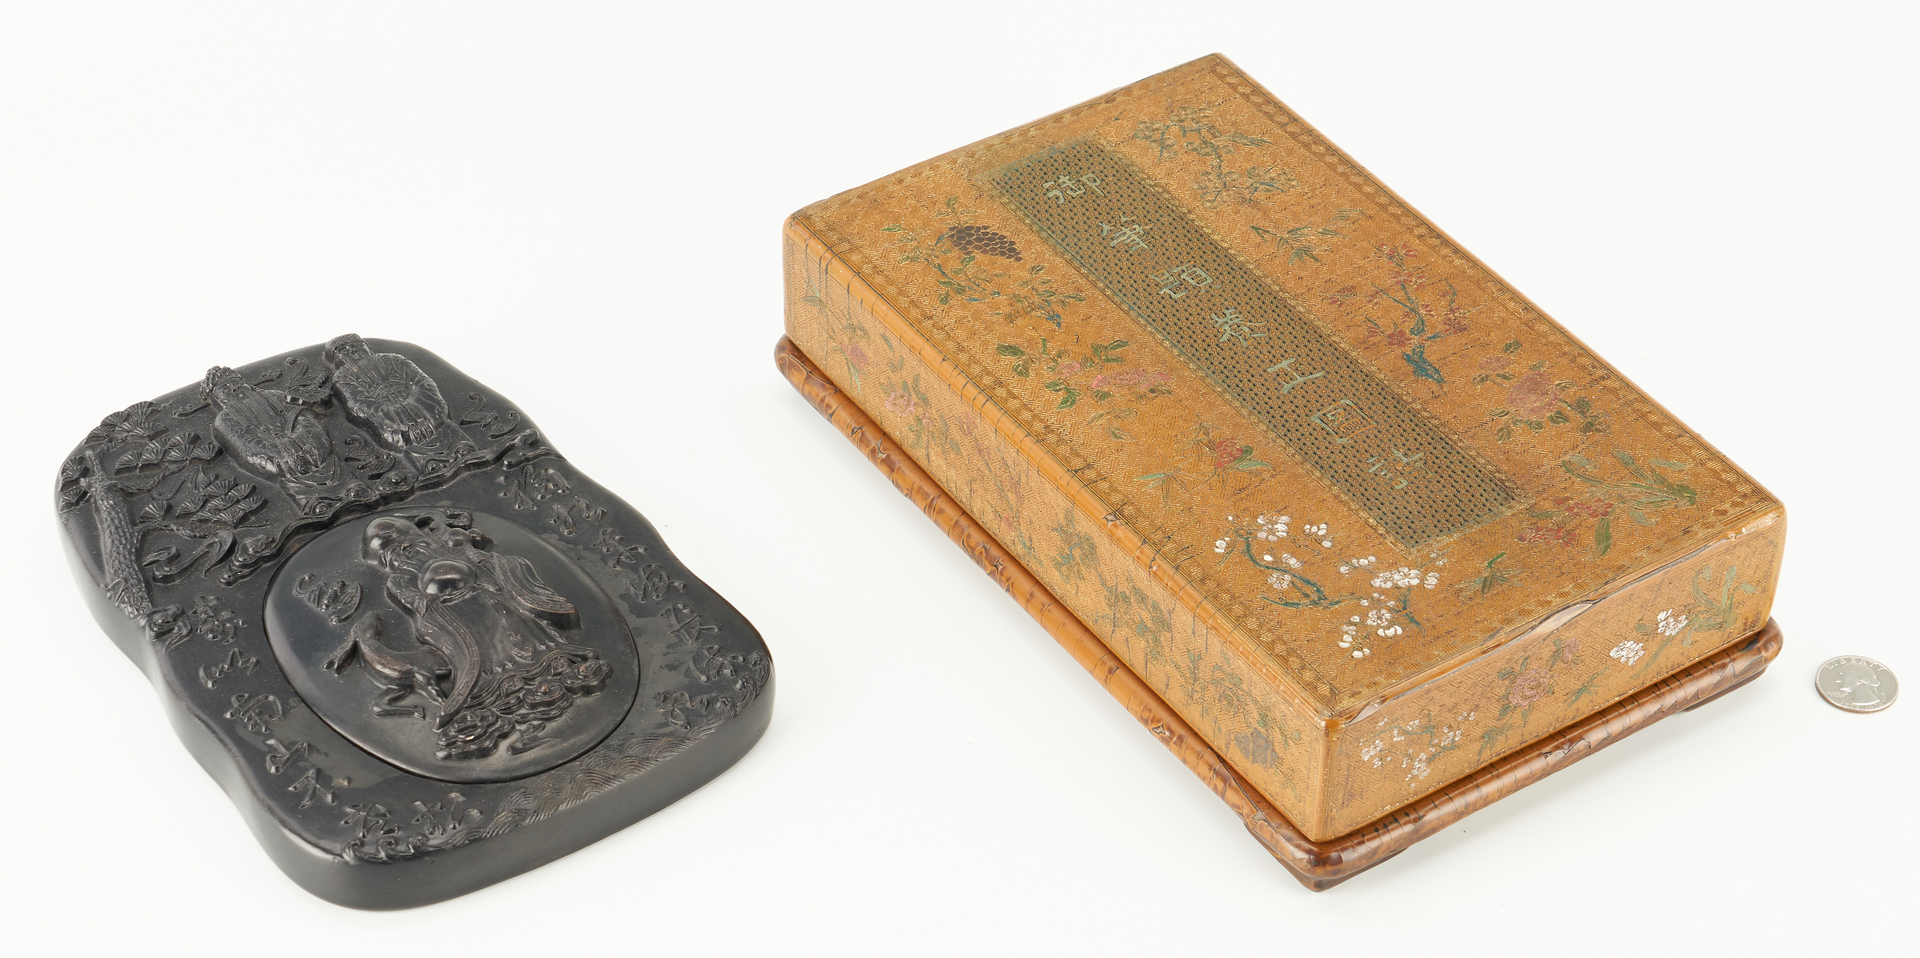 Lot 9: Chinese Ink Stone and Lacquer Box